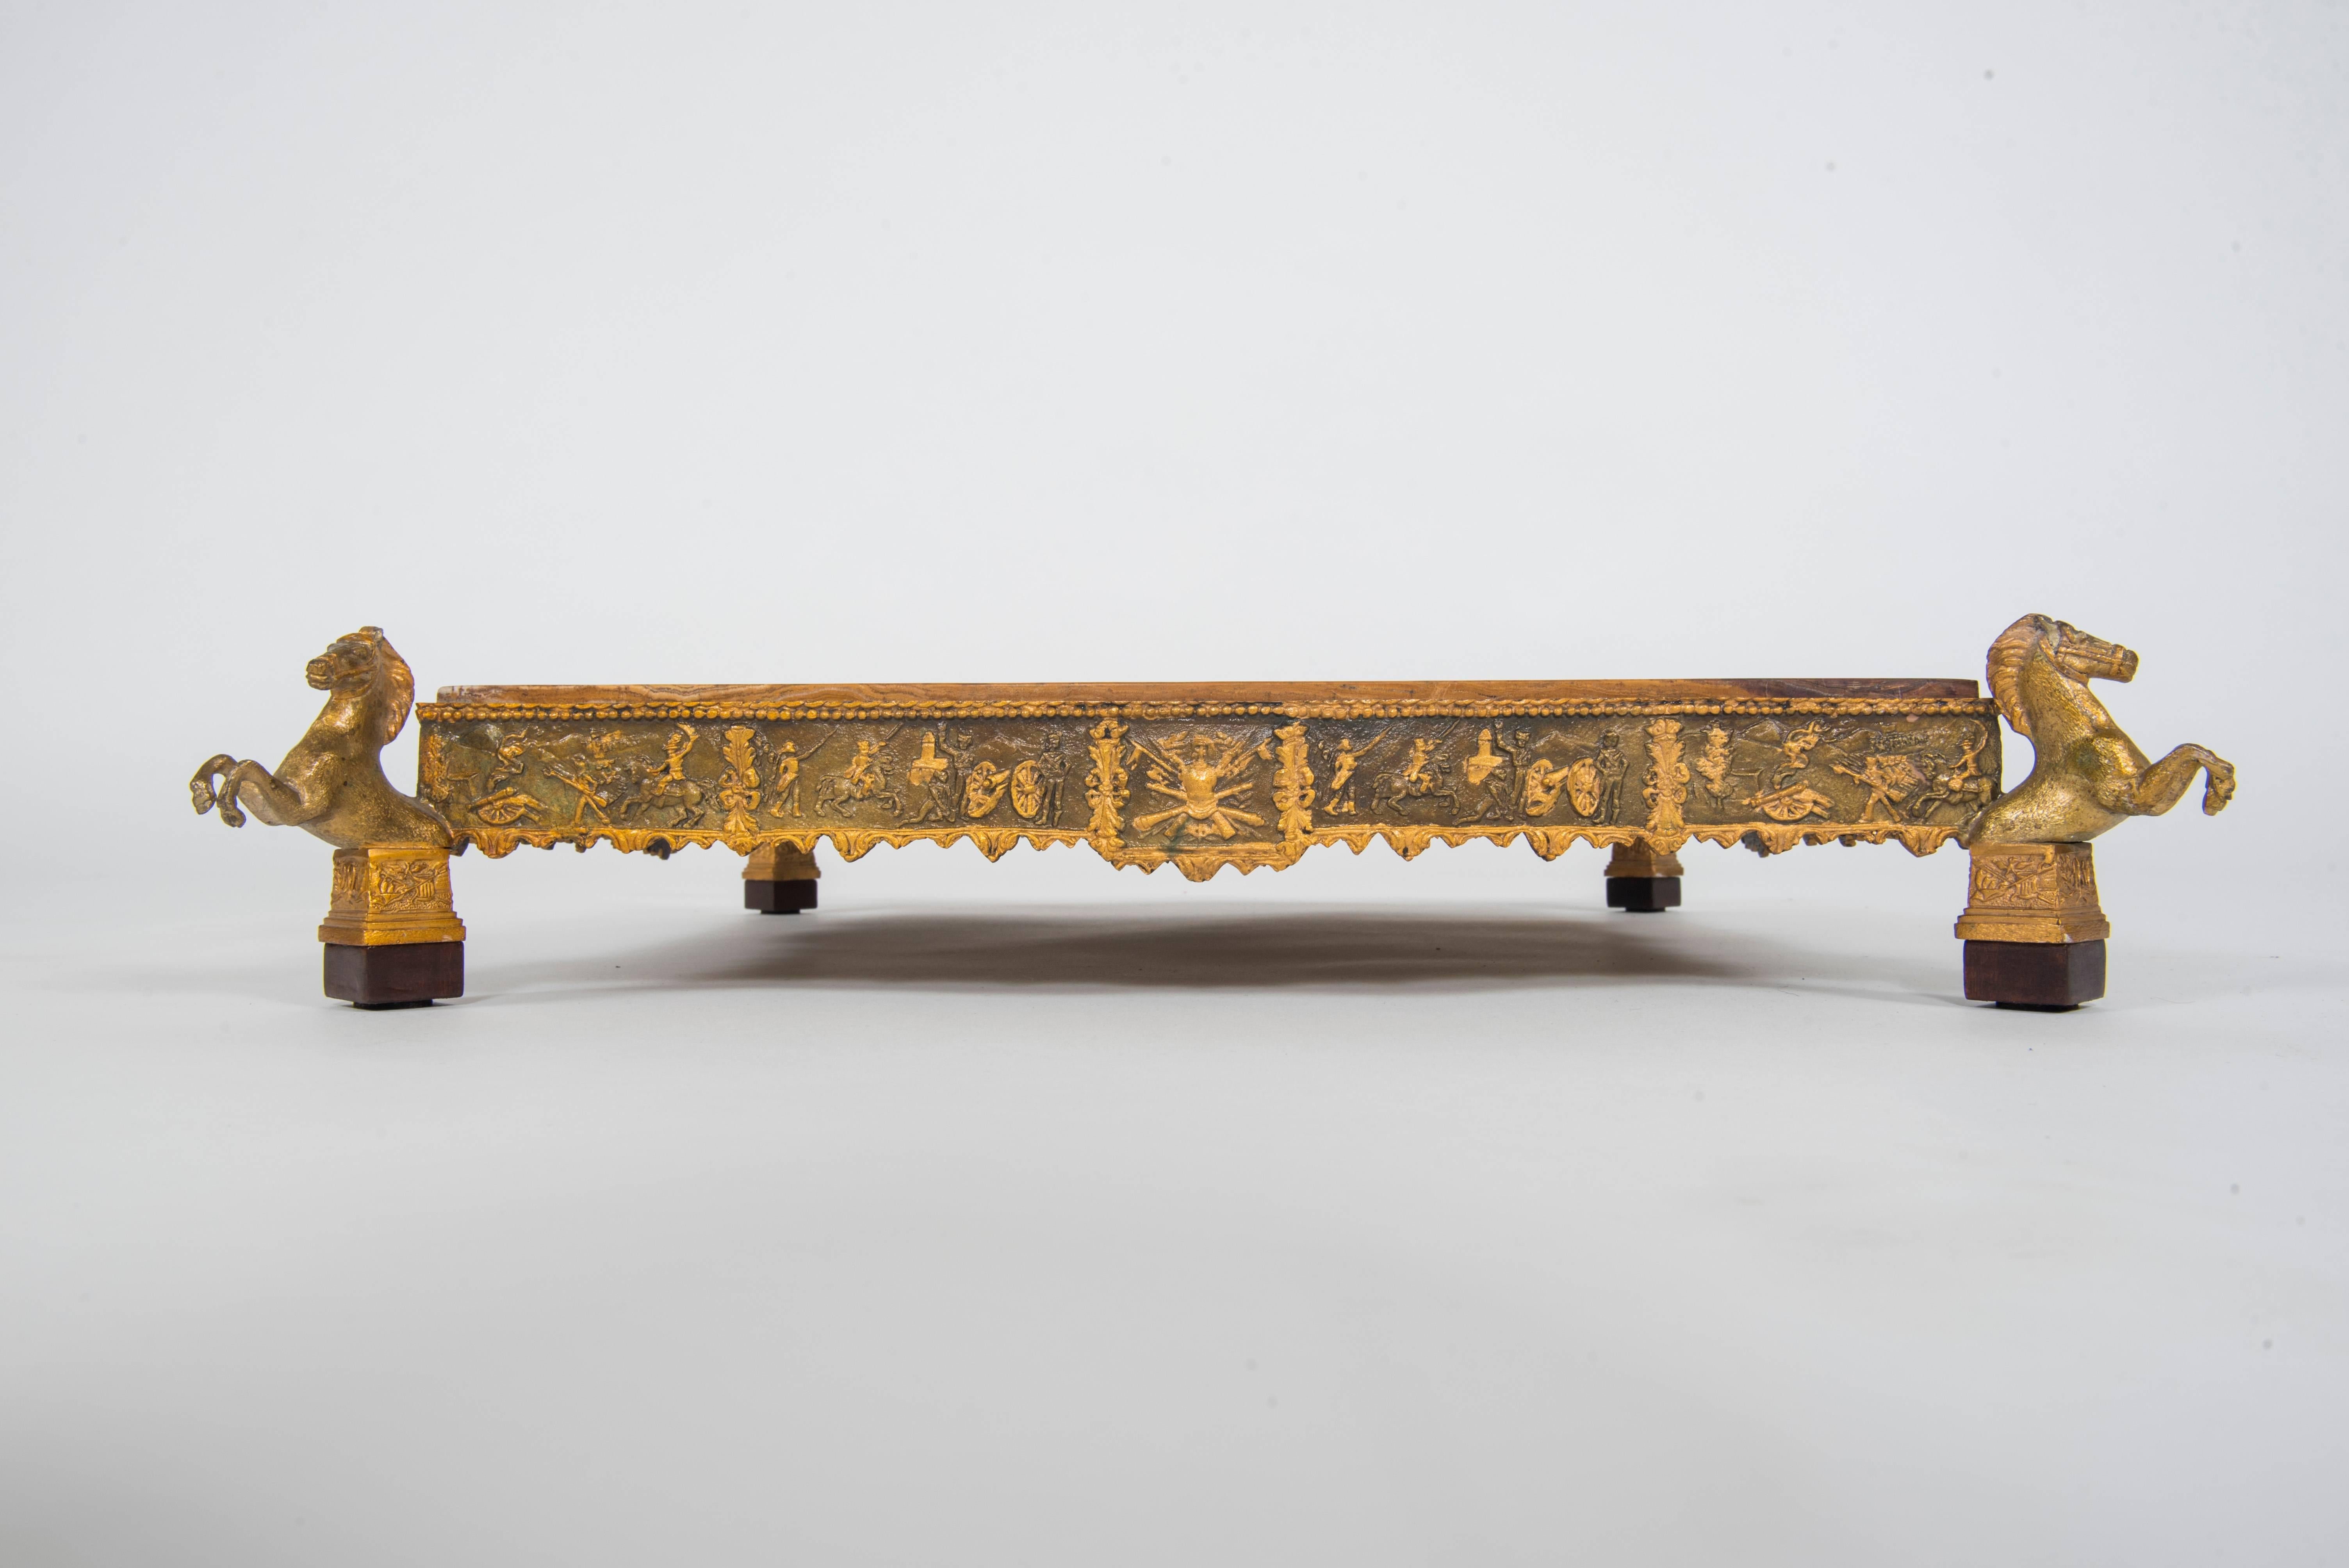 A highly decorative military bronze banded plateau featuring four rearing horses on wood plinths with a cognac/caramel onyx slab.

Measures: Onyx top is 15.63